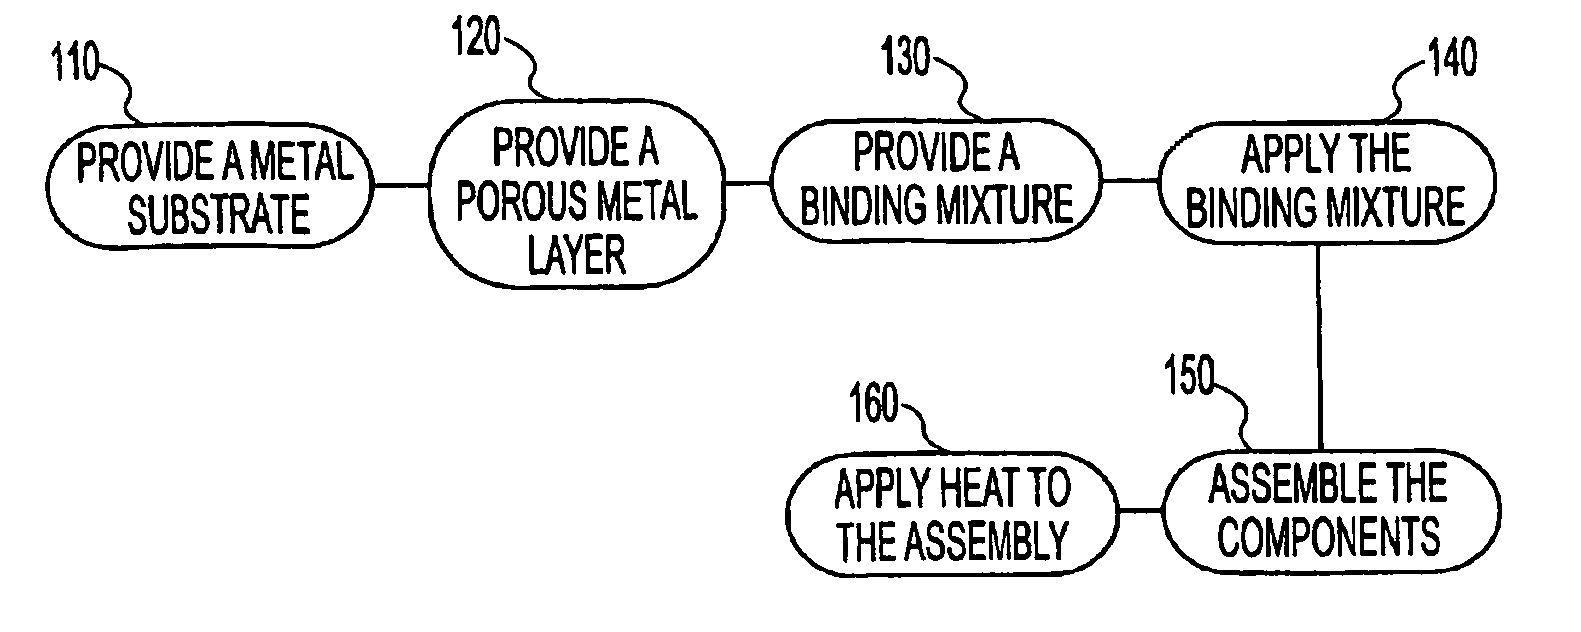 Method for attaching a porous metal layer to a metal substrate